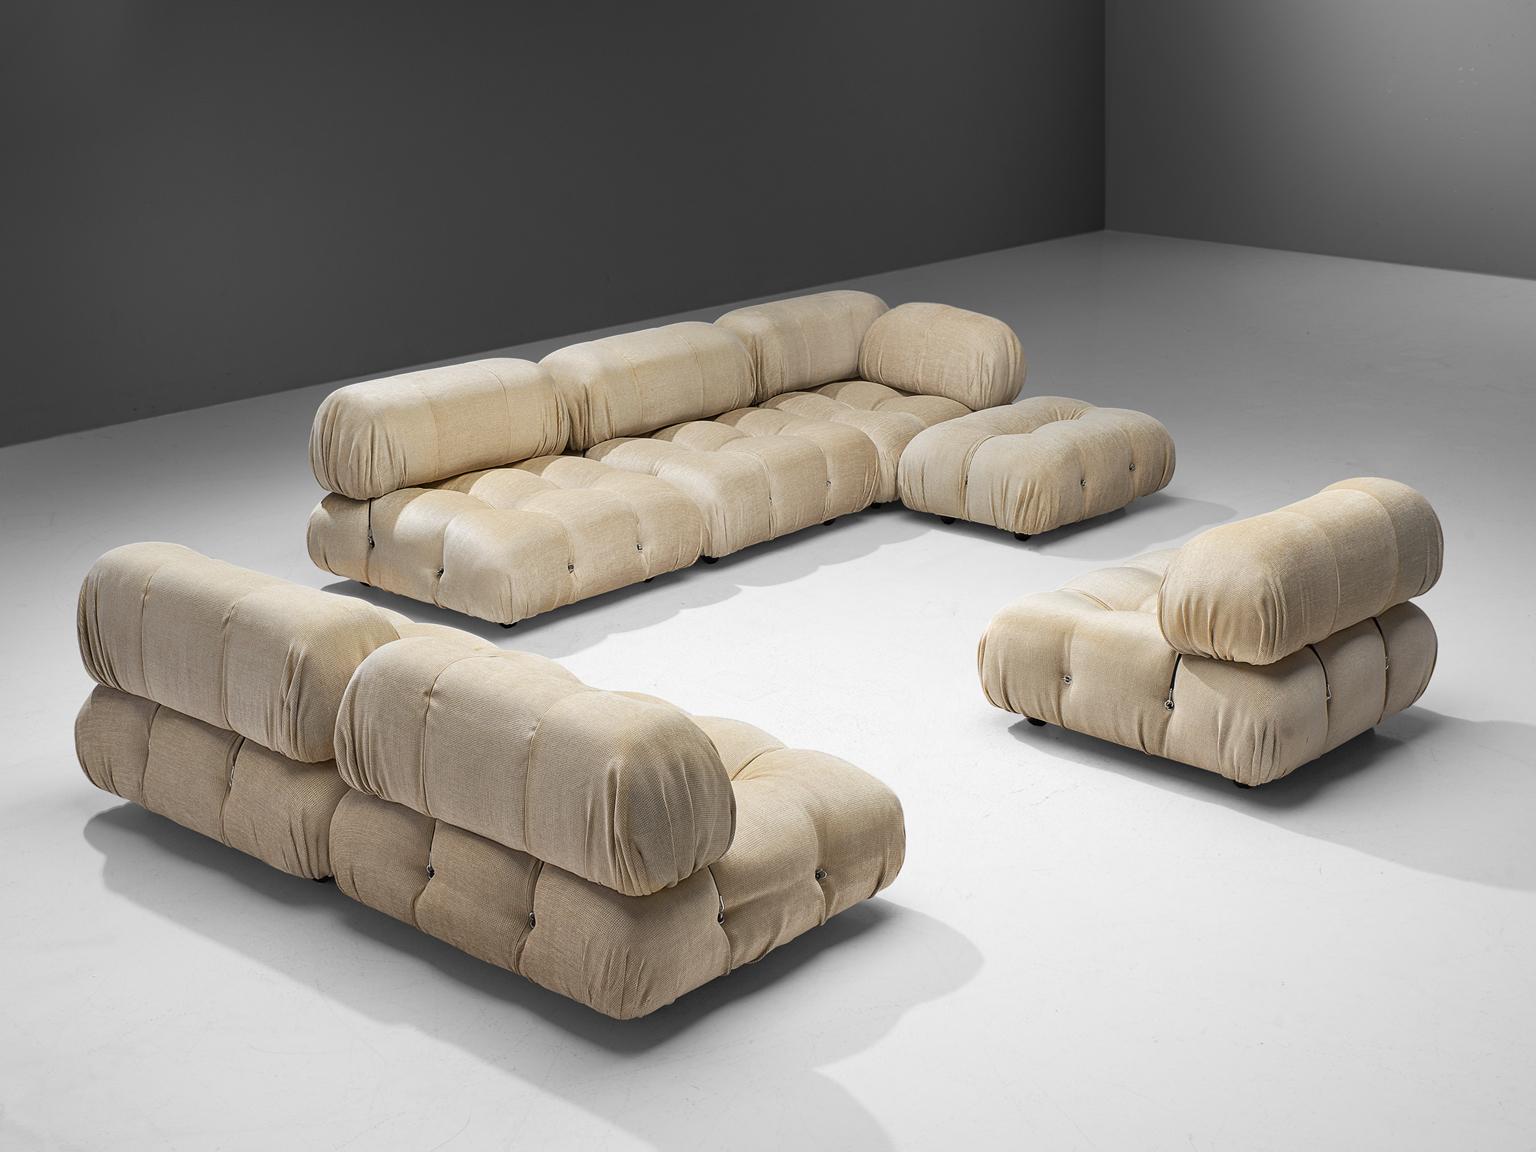 Mario Bellini, 'Camaleonda' sofa, in ivory white upholstery, Italy, 1972.

This sofa is made on request in our upholstery atelier and consists of six large and one small element. With that come six large and small arm or backrest. The sectional